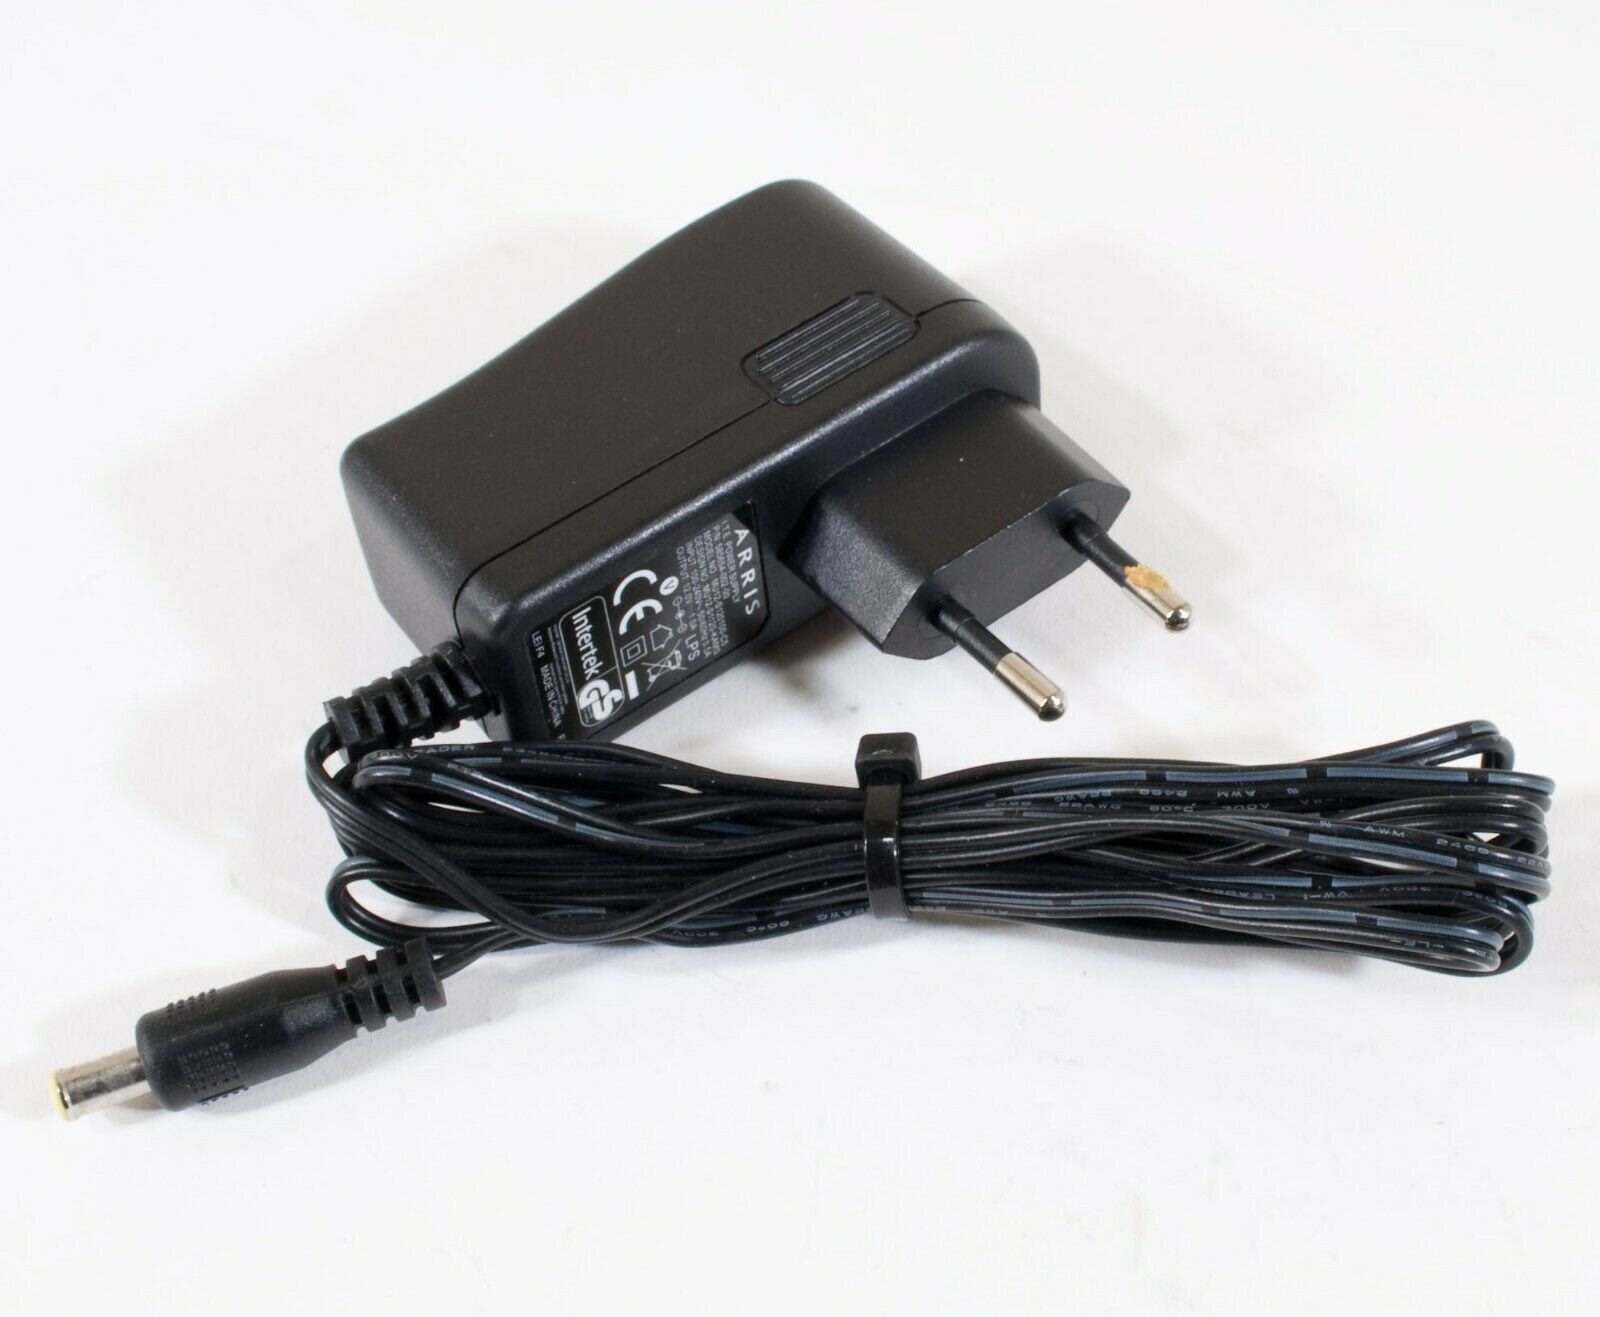 Arris MU12-S120100-C5 AC Adapter 12V 1A I.T.E. Power Supply Output Current: 1 A Voltage: 12 V MPN: MU12-S120100-C5 Ty